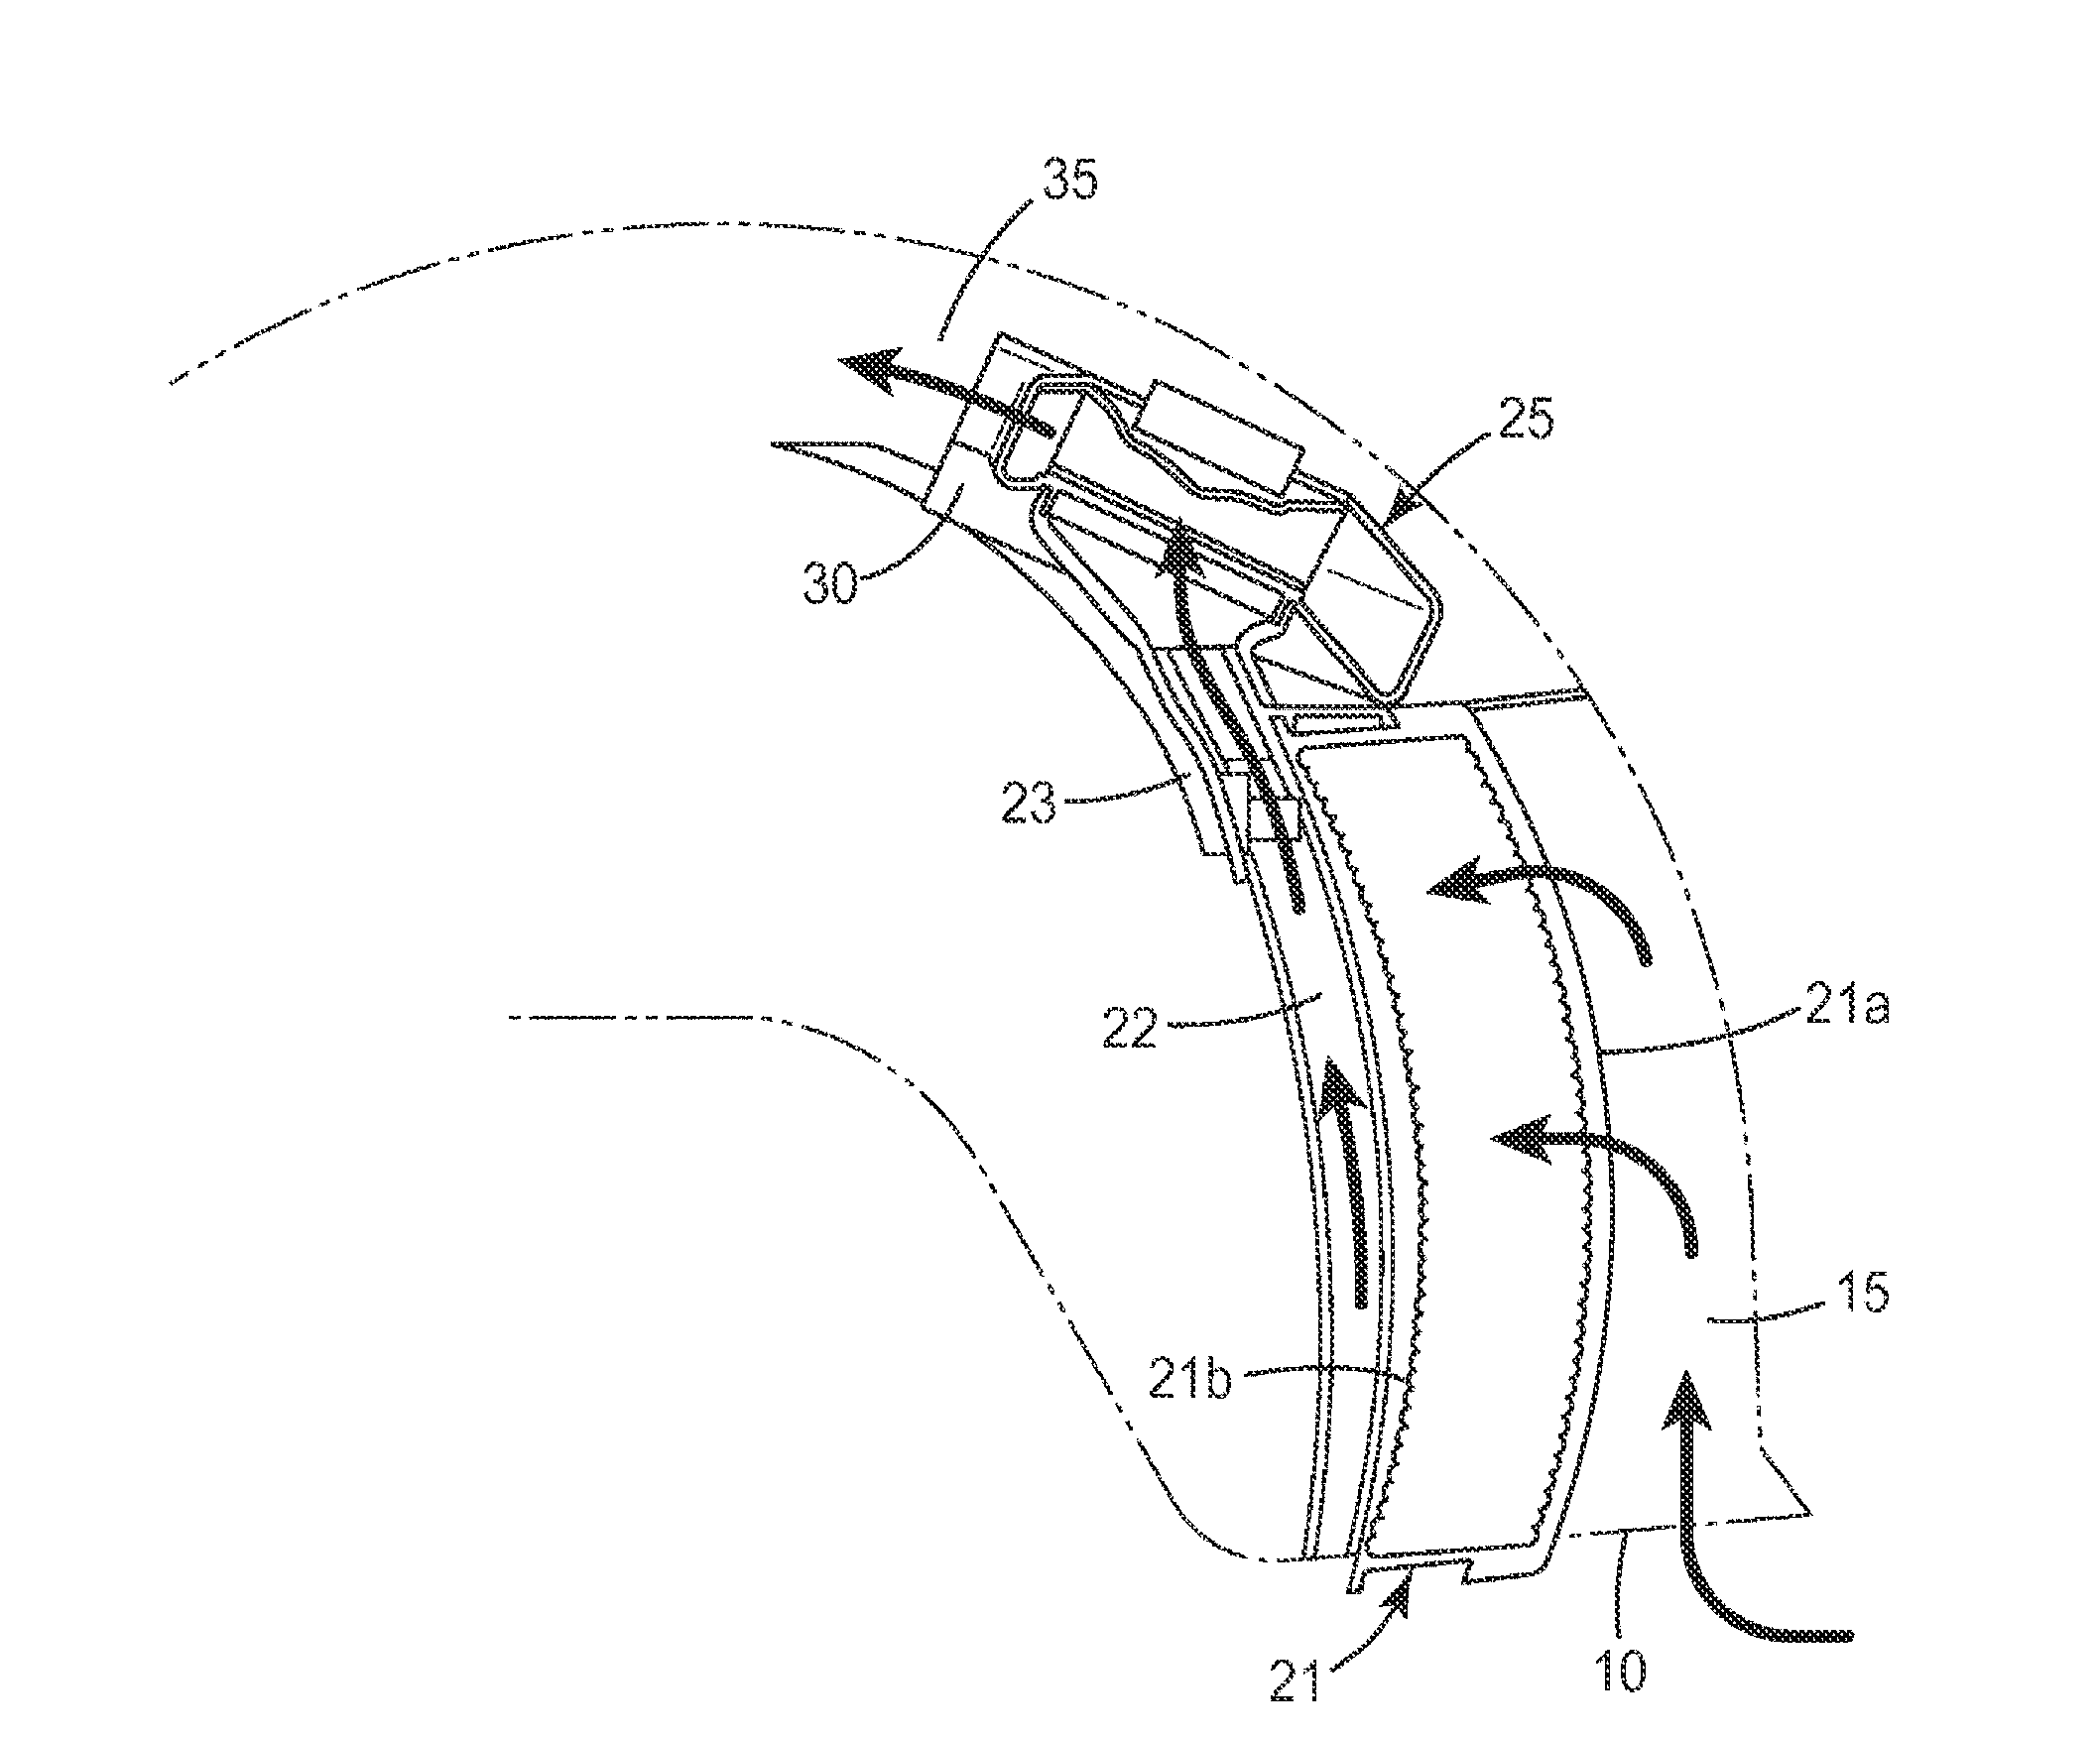 Helmet-mounted respirator apparatus with a dual plenum system